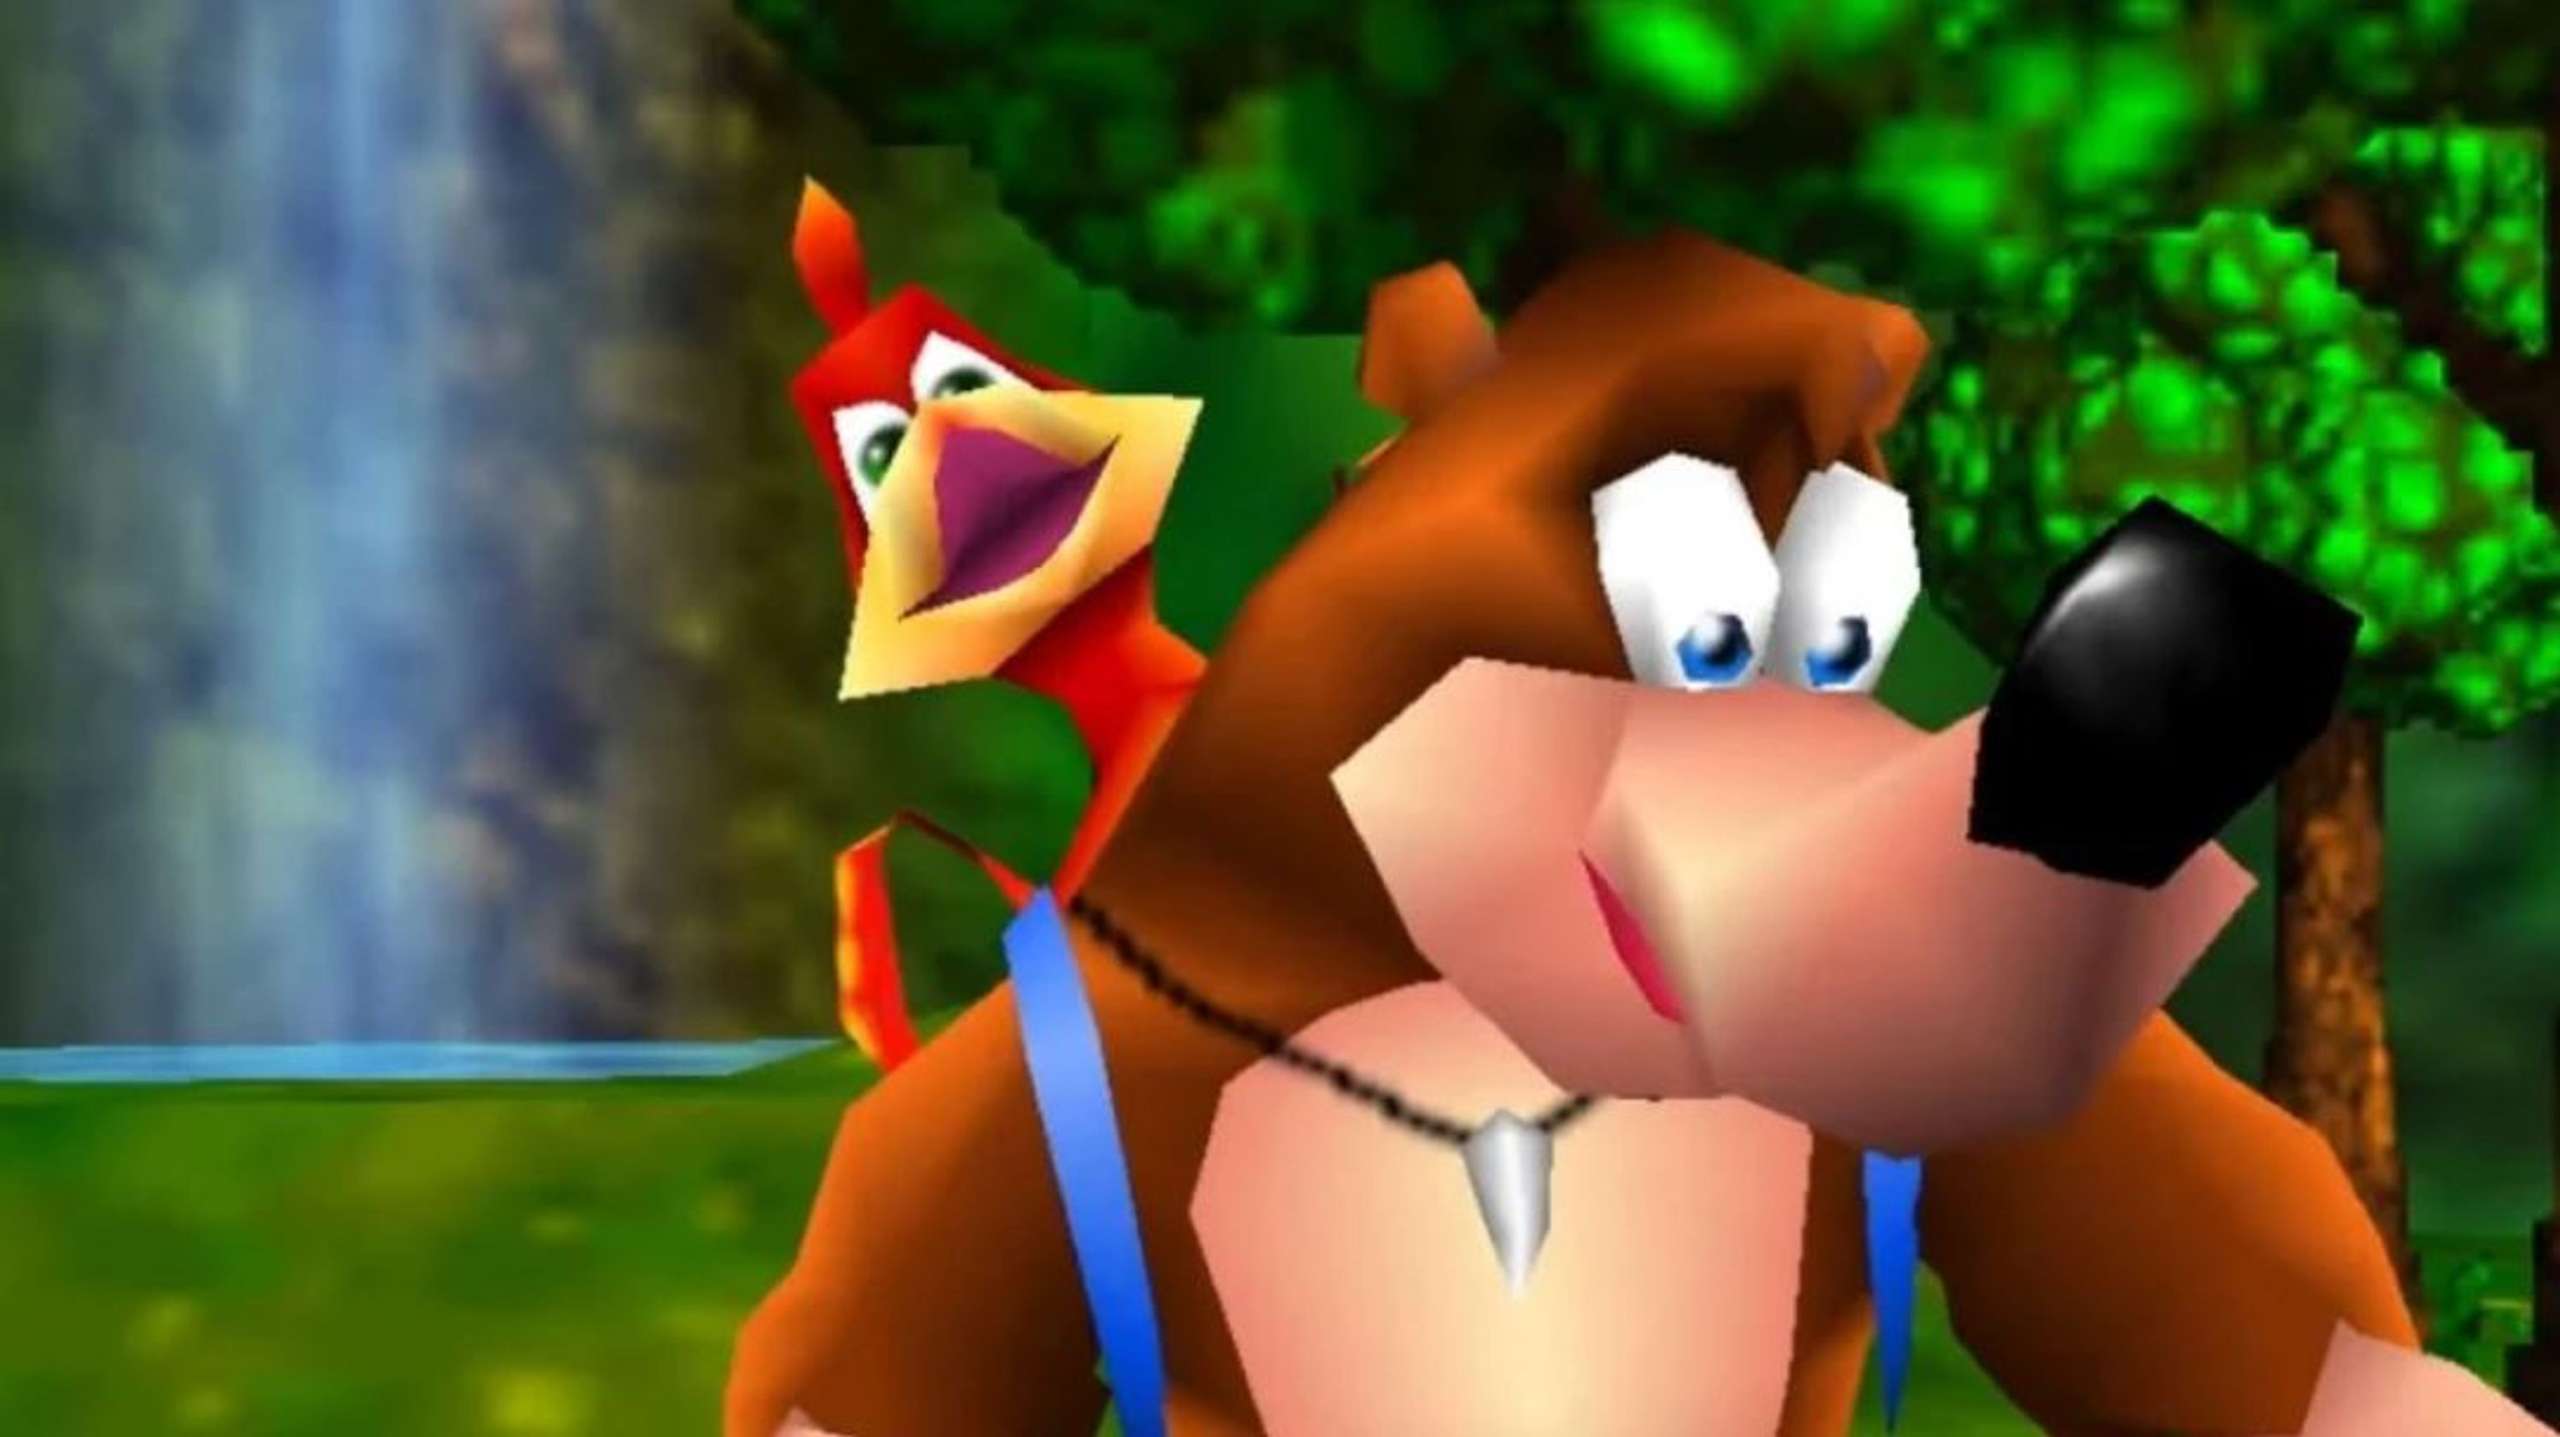 Insider: Microsoft Approved The Creation Of A New Platformer Banjo-Kazooie For Xbox Series X|S